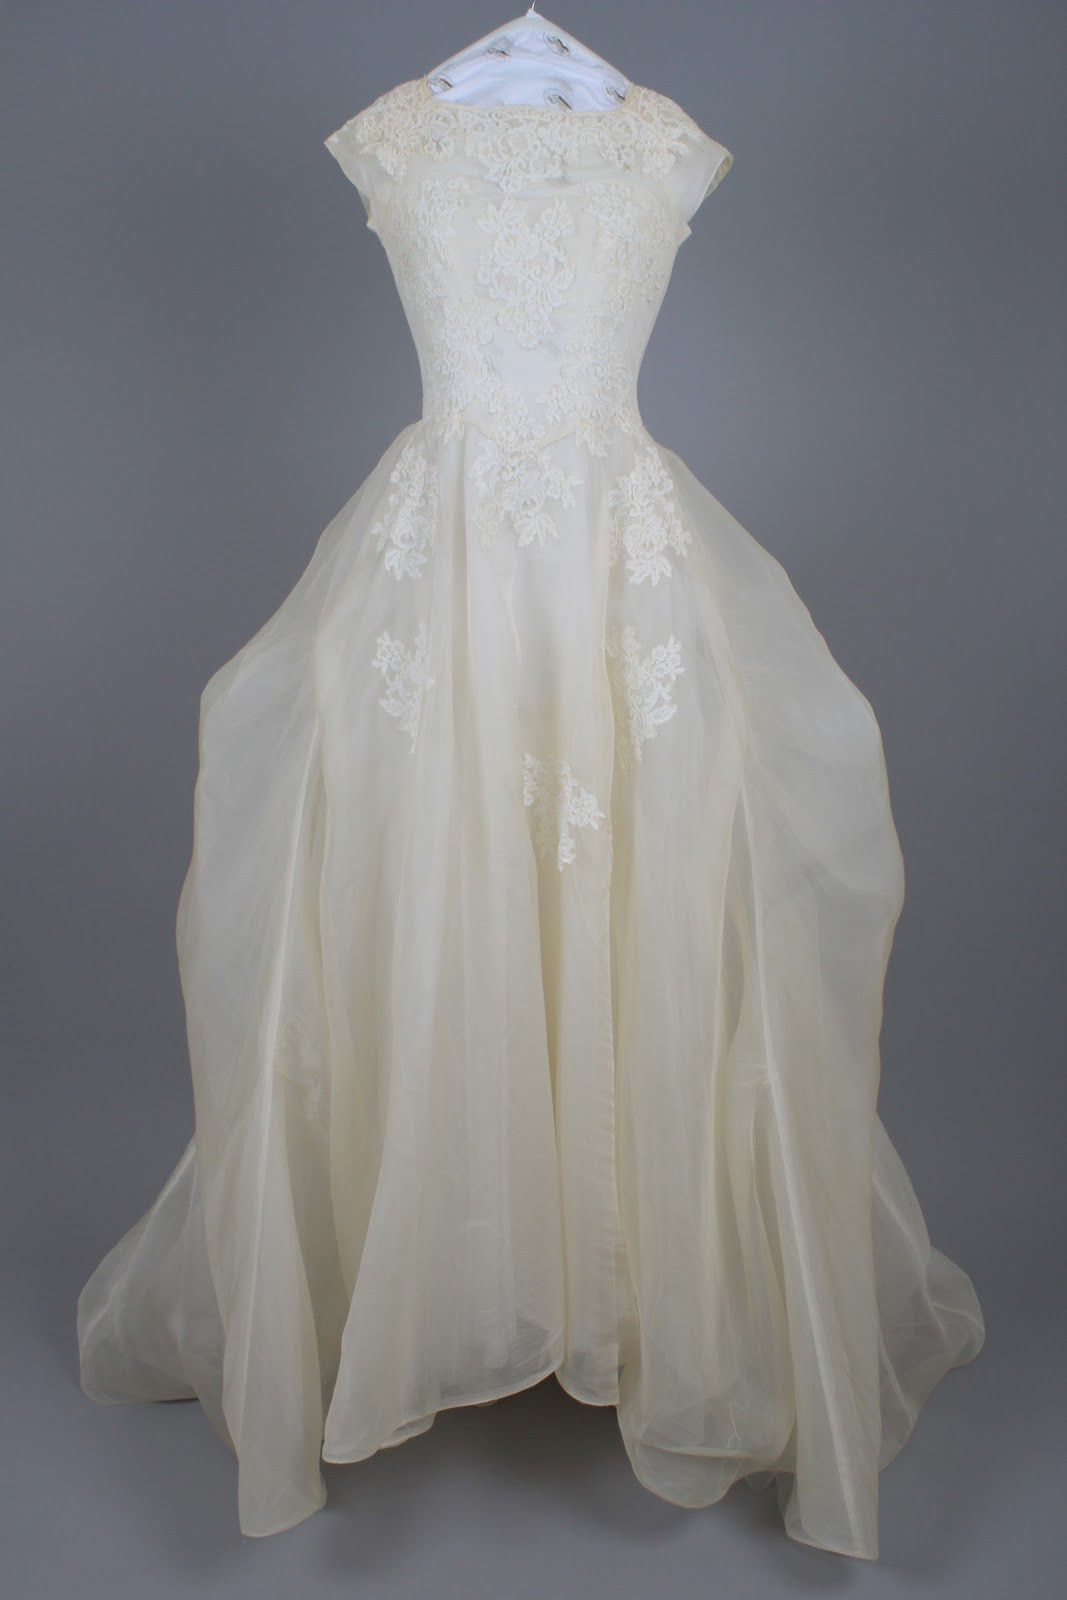 Wedding Gown Cleaning
 Bridal Gown Cleaning & Preservation Follow a 50 year old